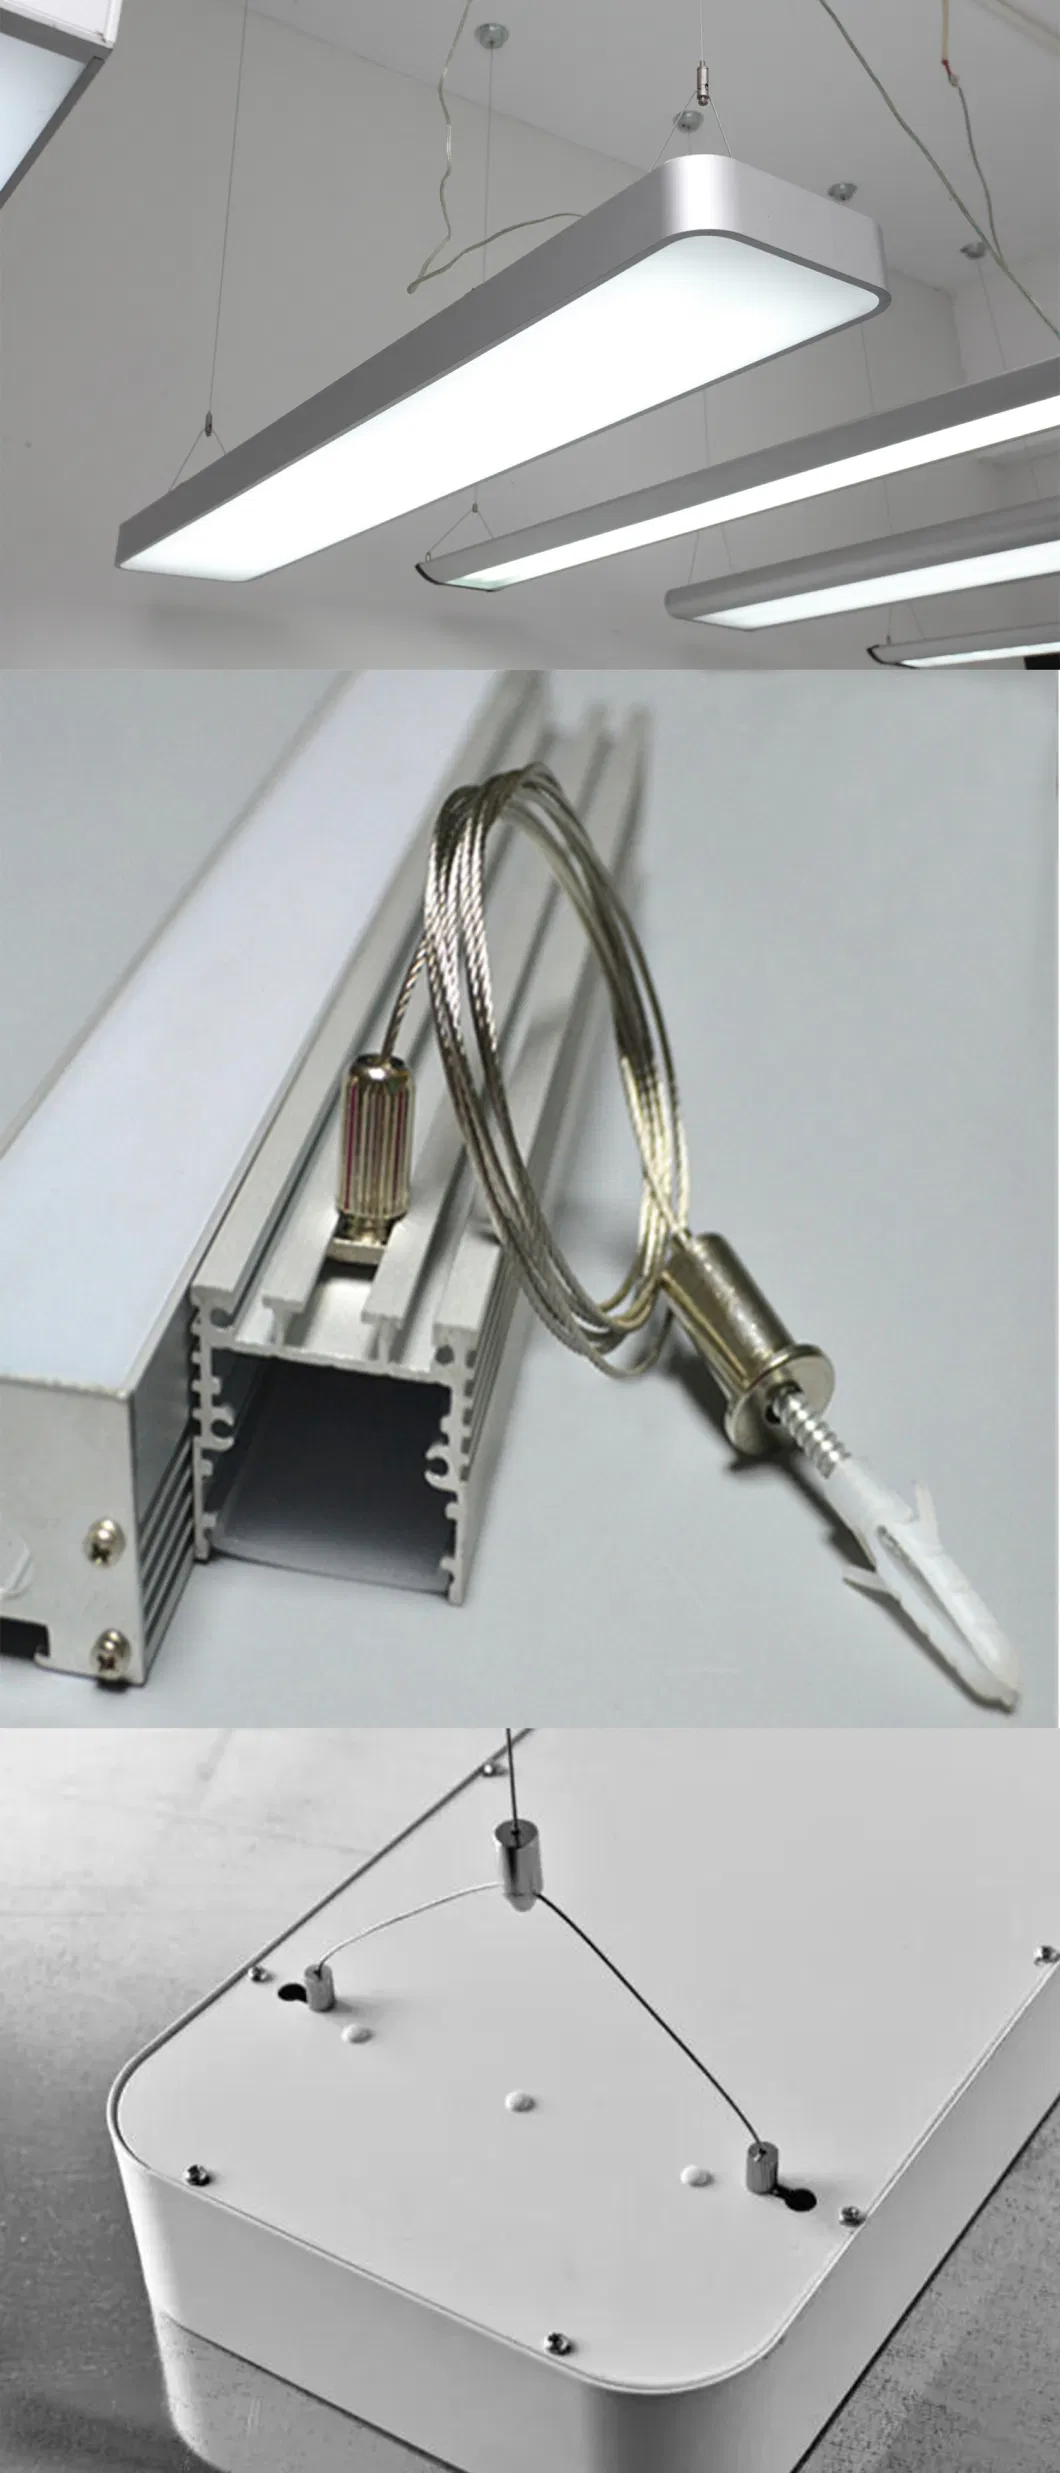 Ceiling Hanging Wire Assembly with Mountaineering Buckle